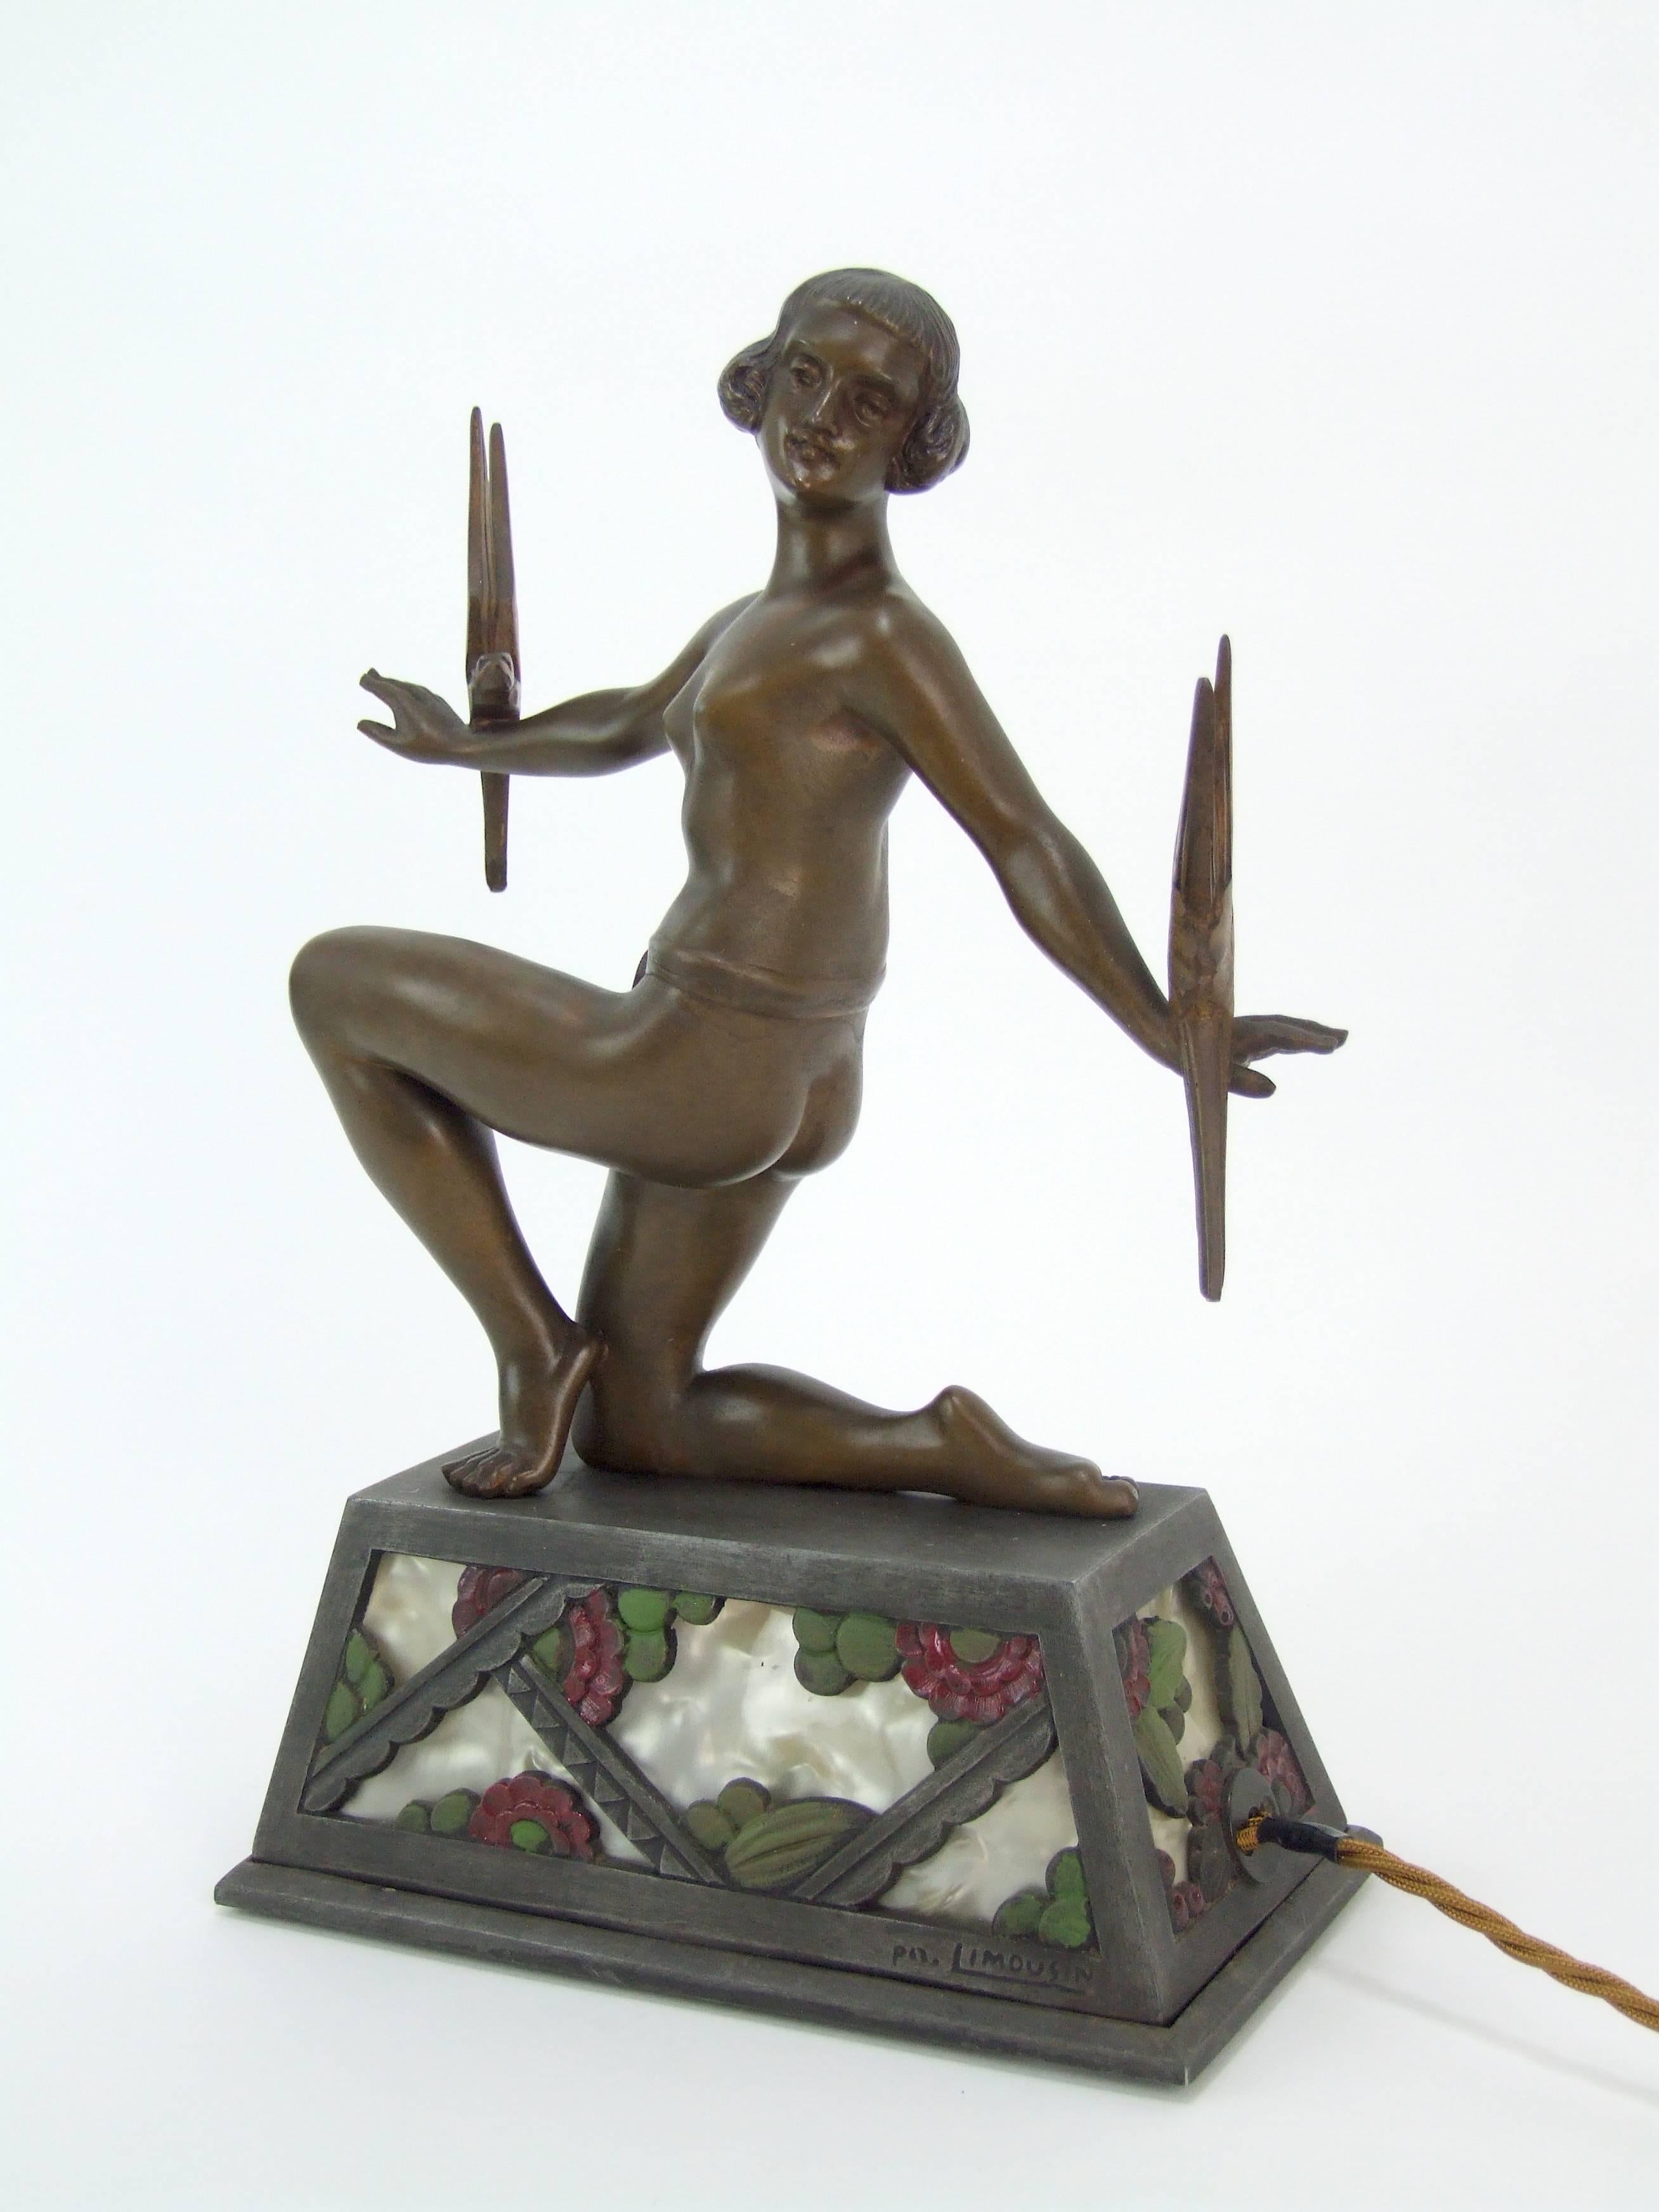 French spelter Art Deco lady lamp - a signed piece by Limousin (signed to the light-up base). Hand-painted stylized floral details with phenolic panelling to the base which lights up. It measures 8 inches wide by 4 inches deep and 12 inches high